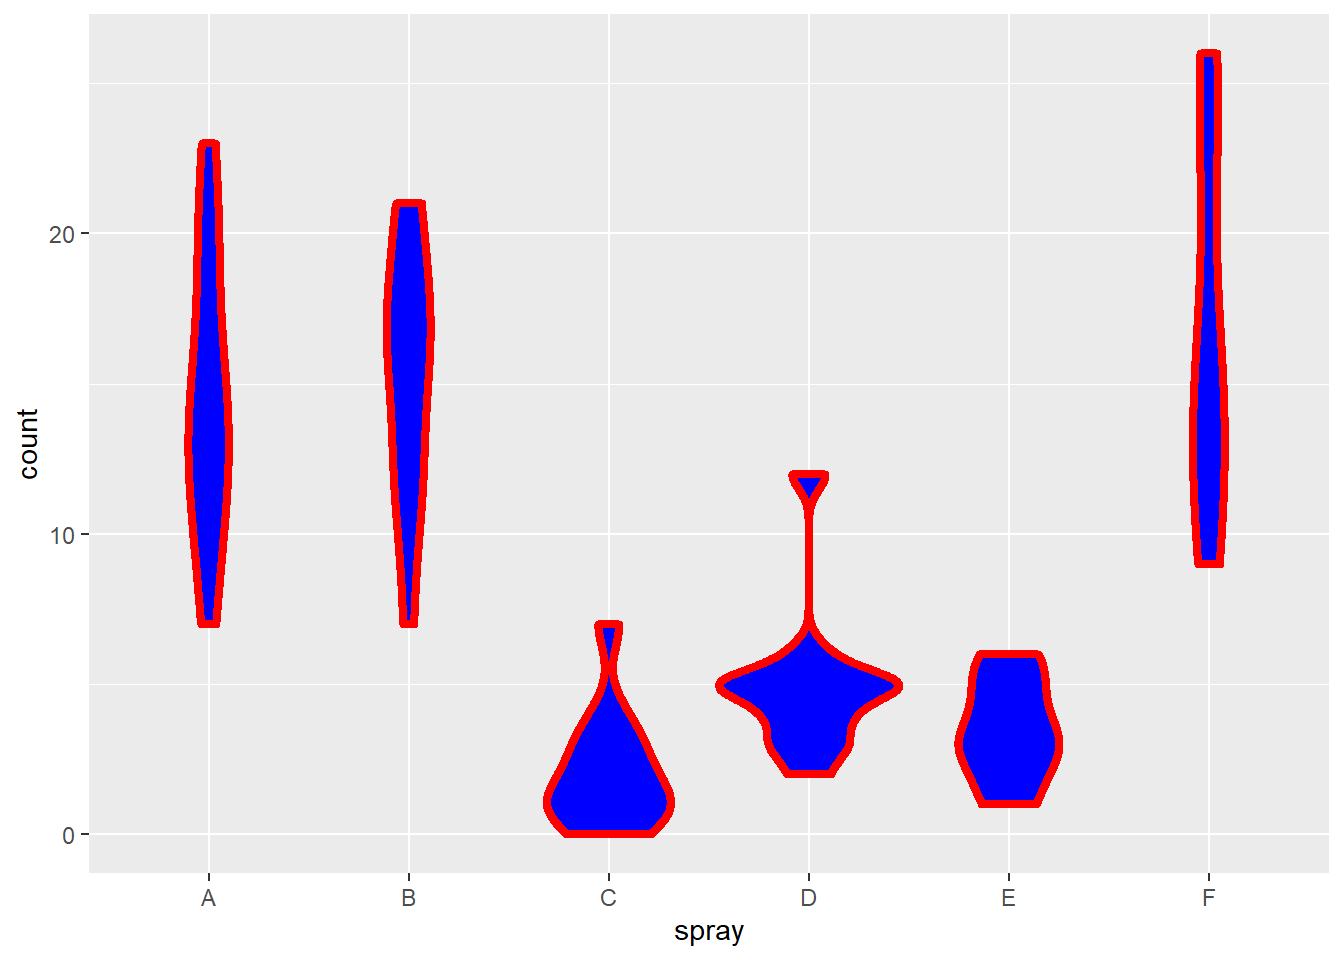 Violin plot for counts of insects in crop fields somewhere in Kansas following treatment with different insecticides.